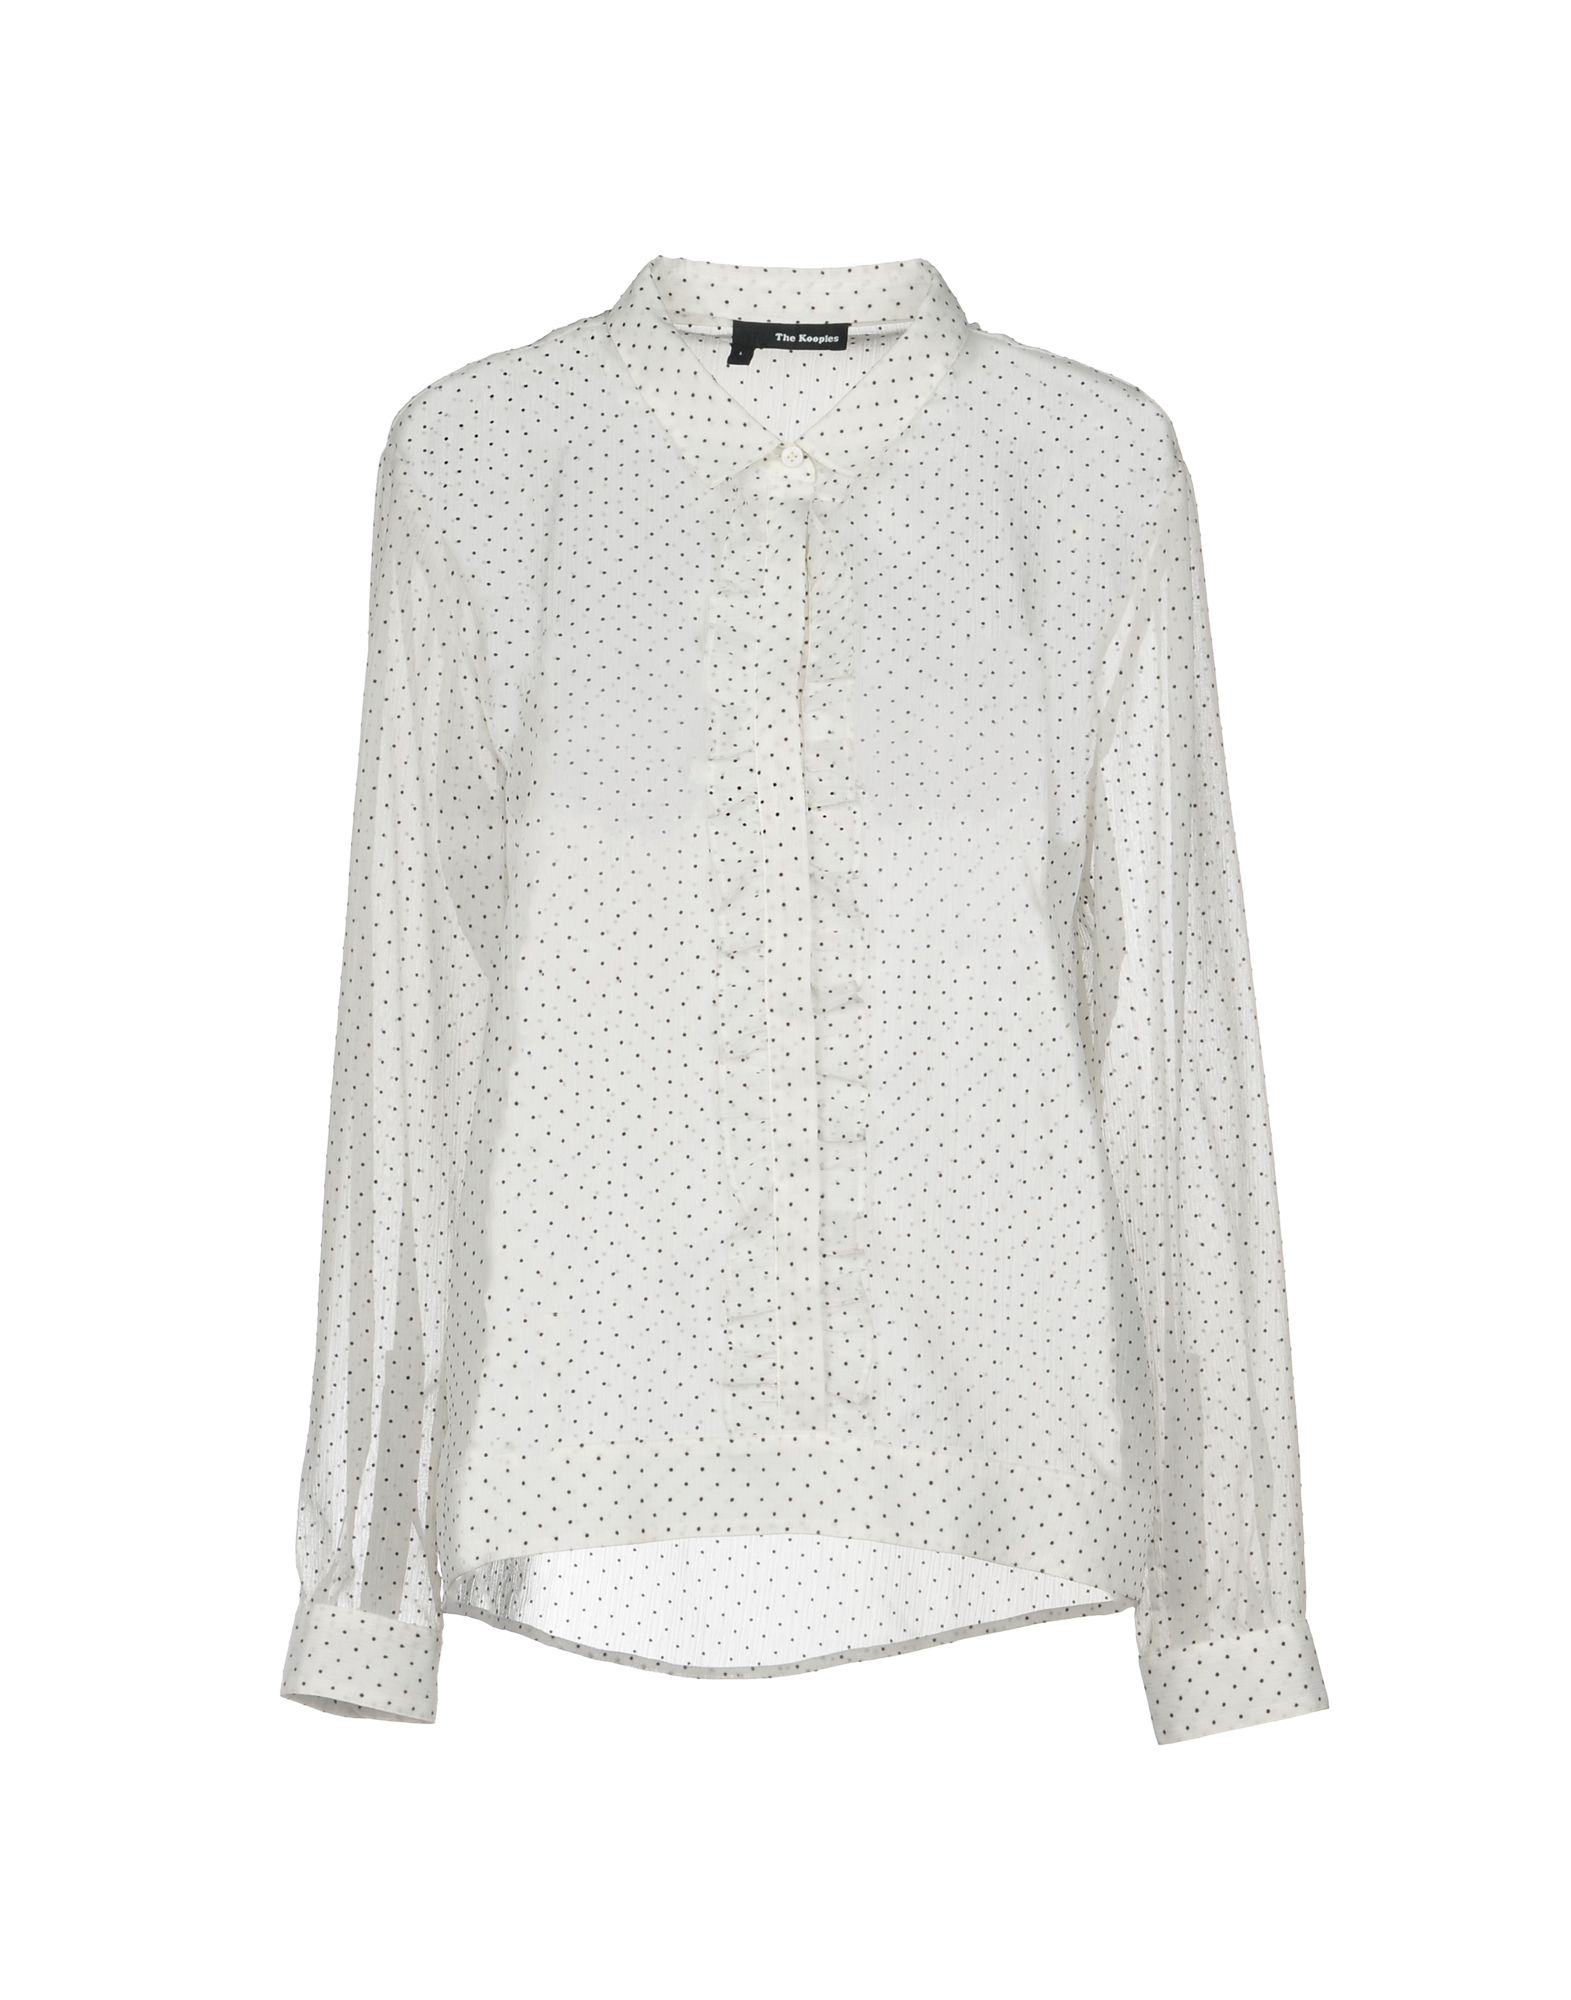 THE KOOPLES Patterned shirts & blouses,38761149OQ 6